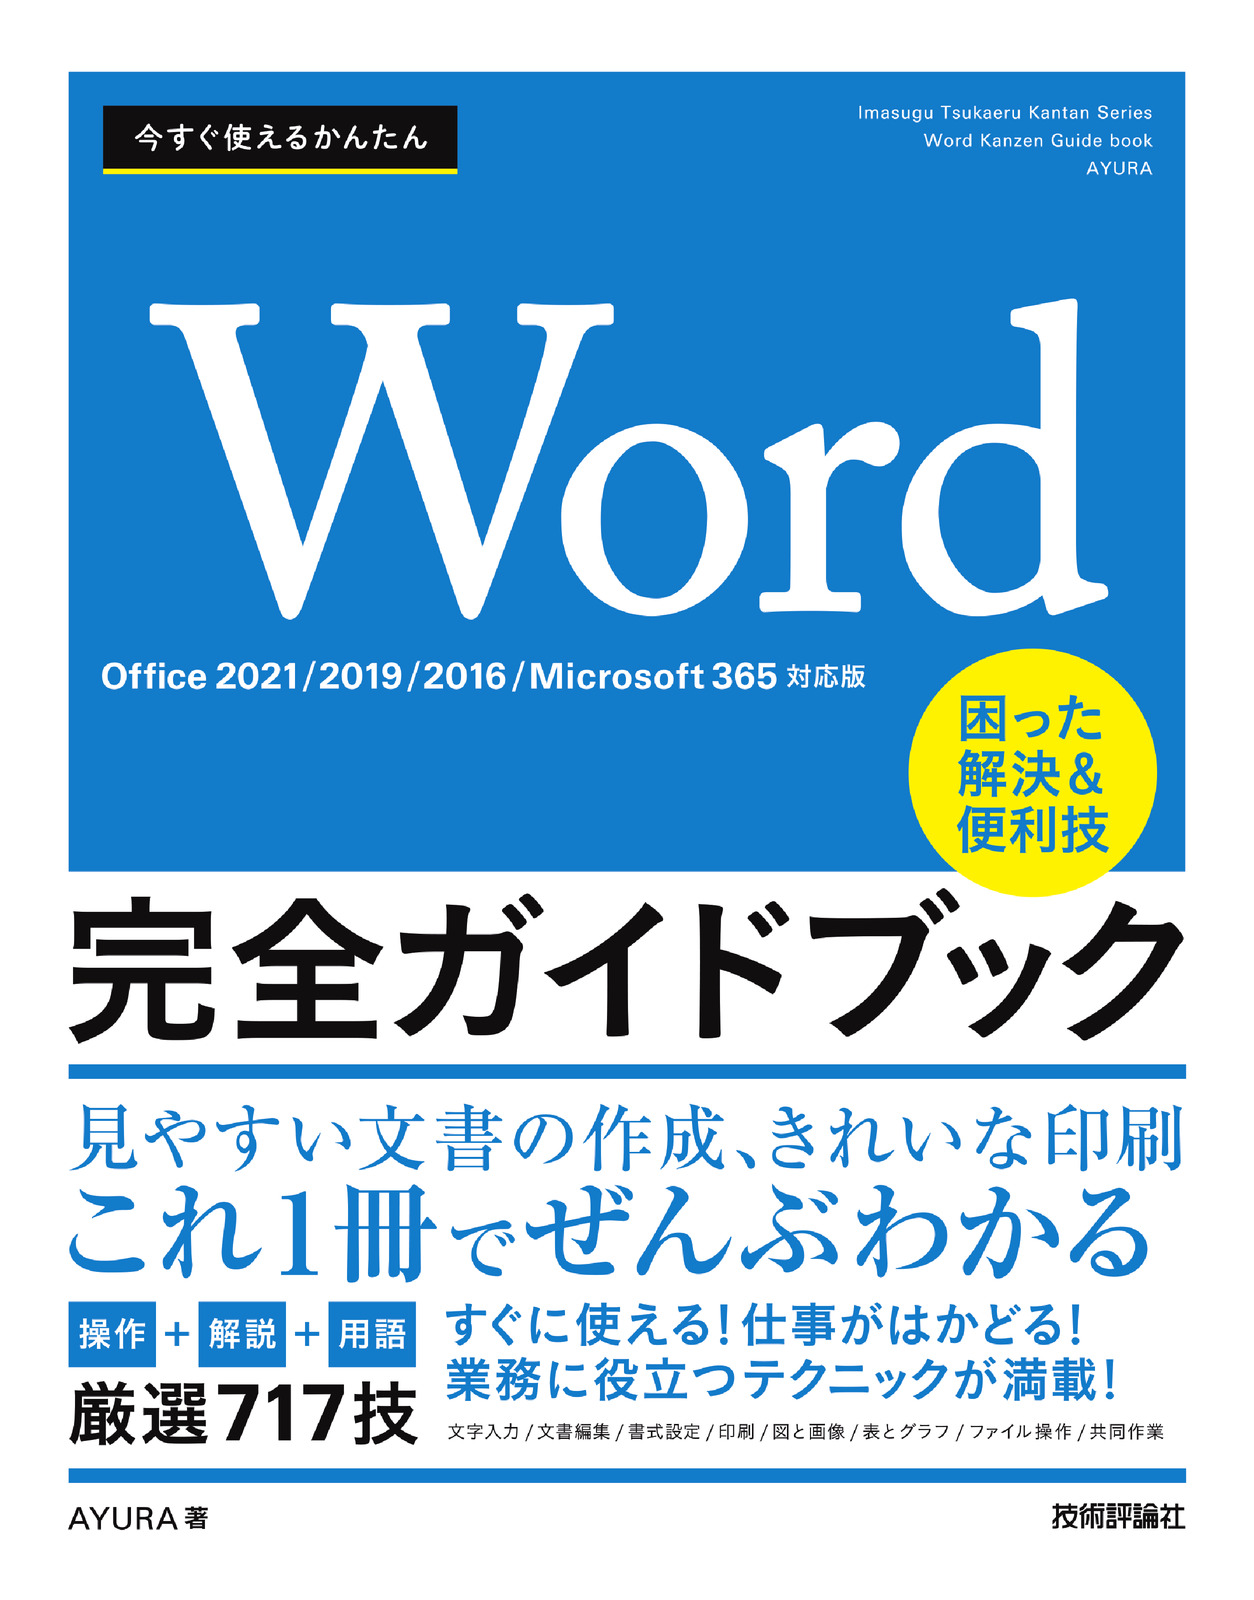 2021/2019/2016/Microsoft　完全ガイドブック　困った解決＆便利技［Office　Word　今すぐ使えるかんたん　365対応版］：書籍案内｜技術評論社